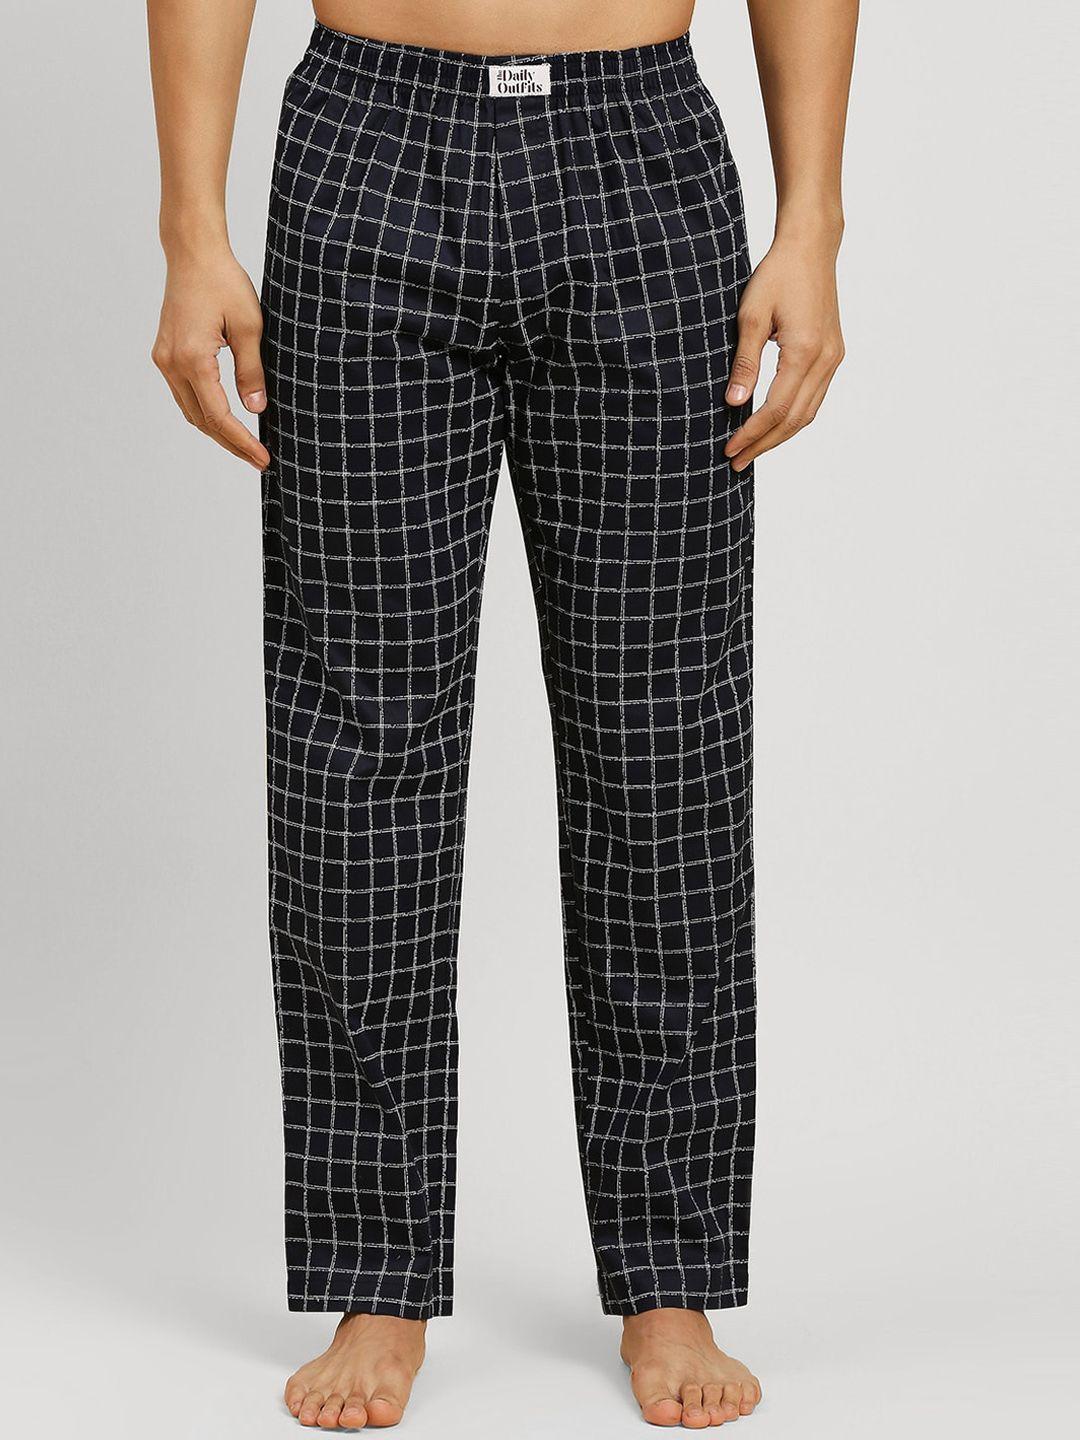 the daily outfits men checked mid-raise cotton lounge pants